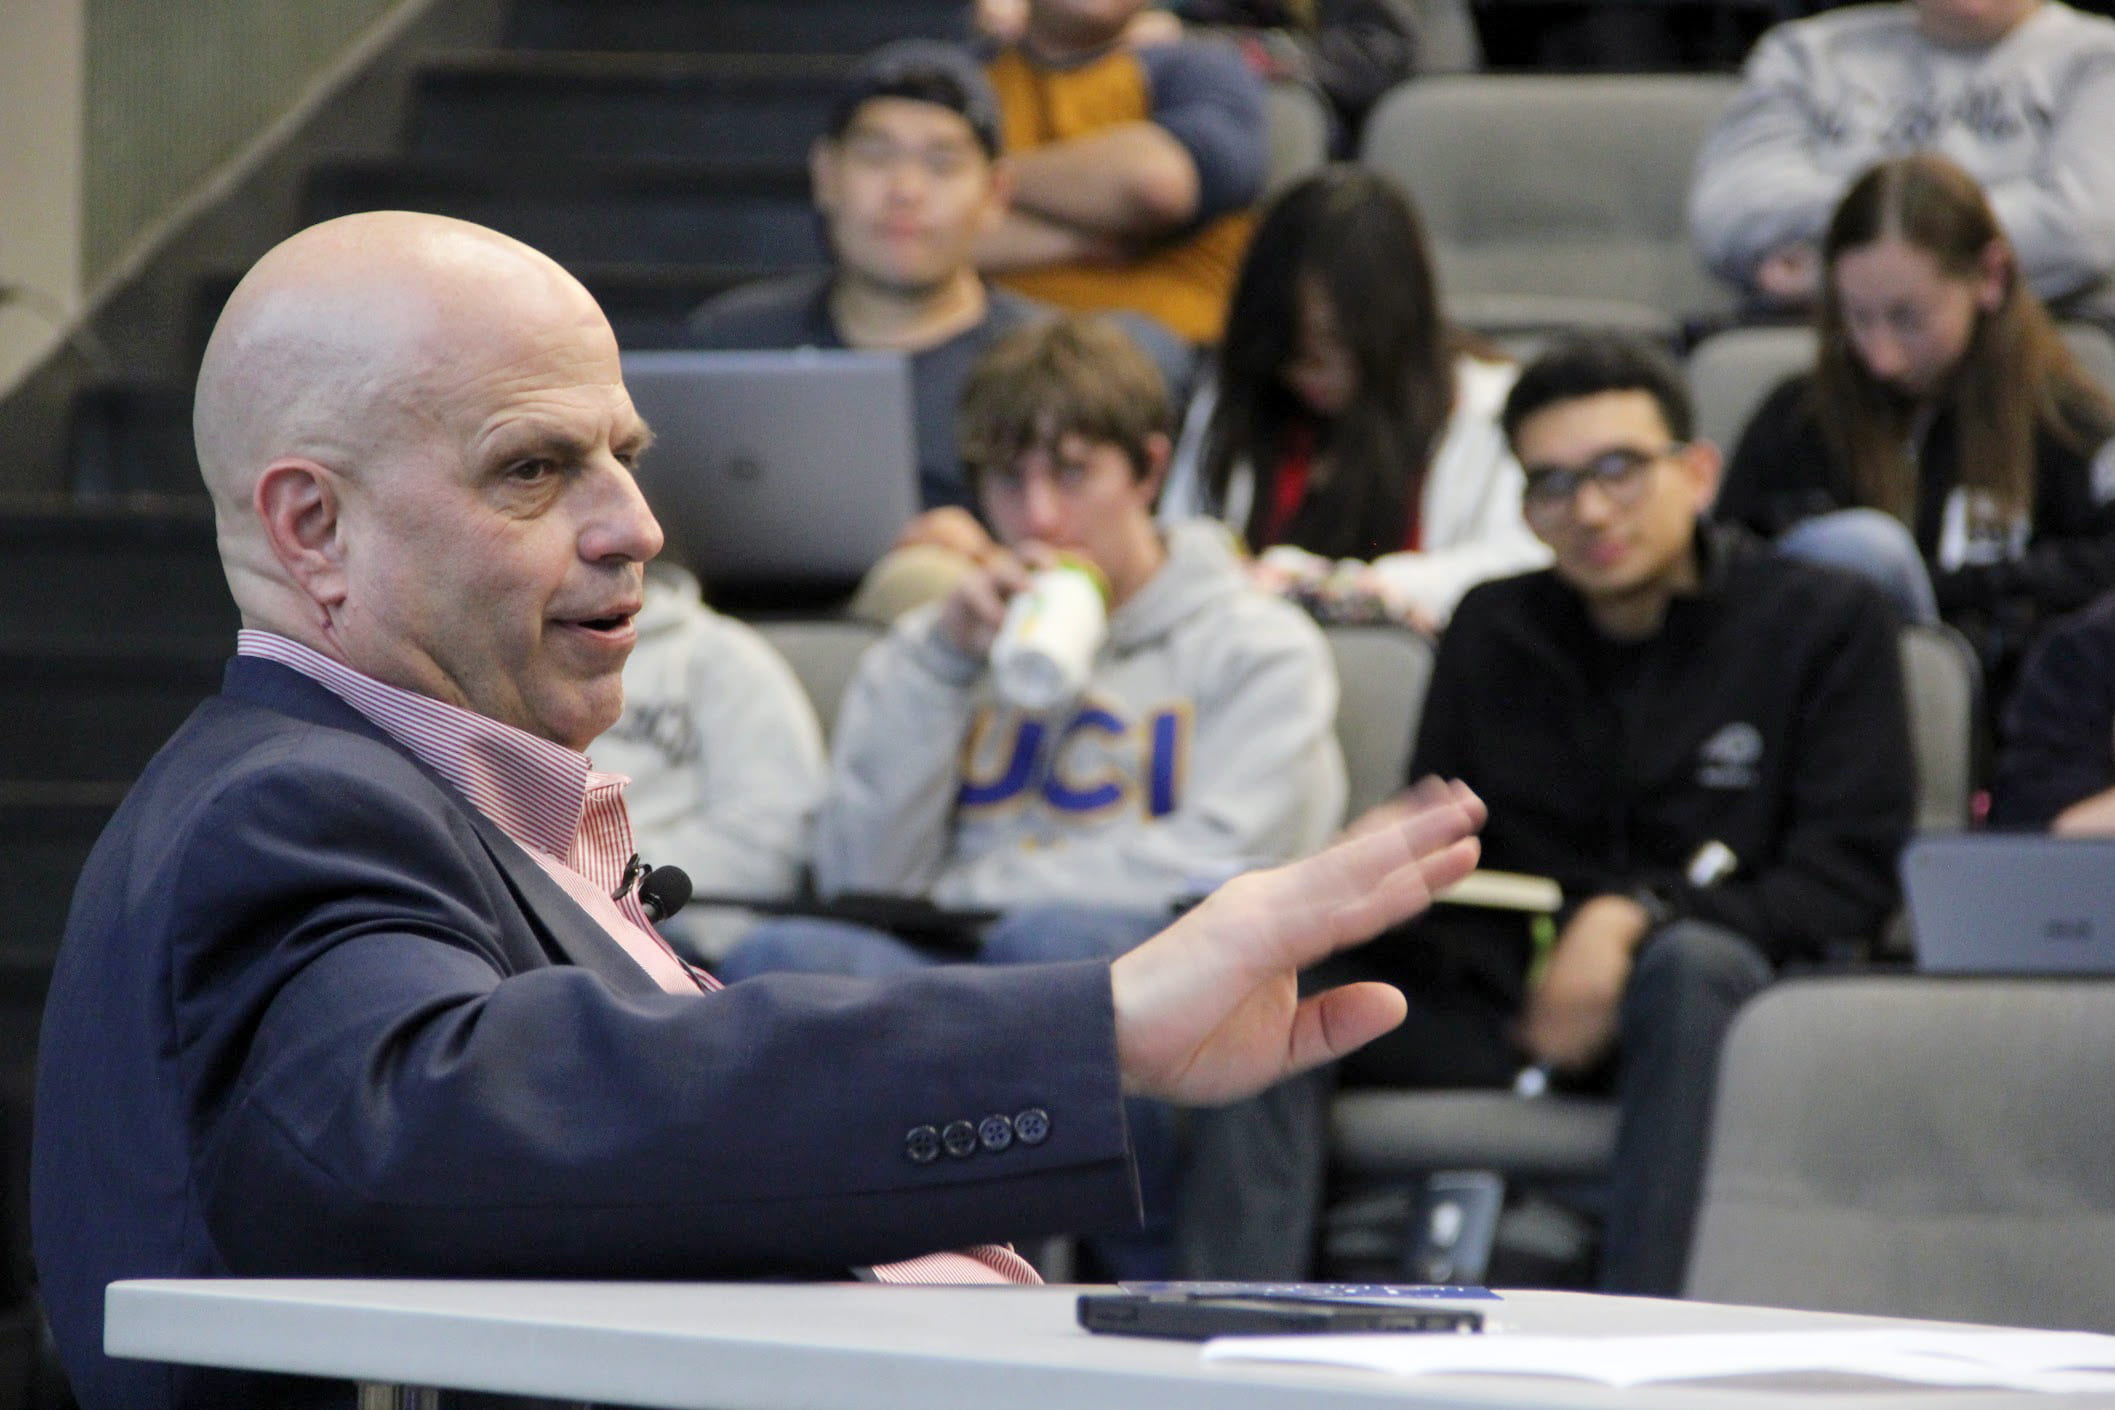 UCI alum Vincent Steckler speaking to student in a lecture hall.